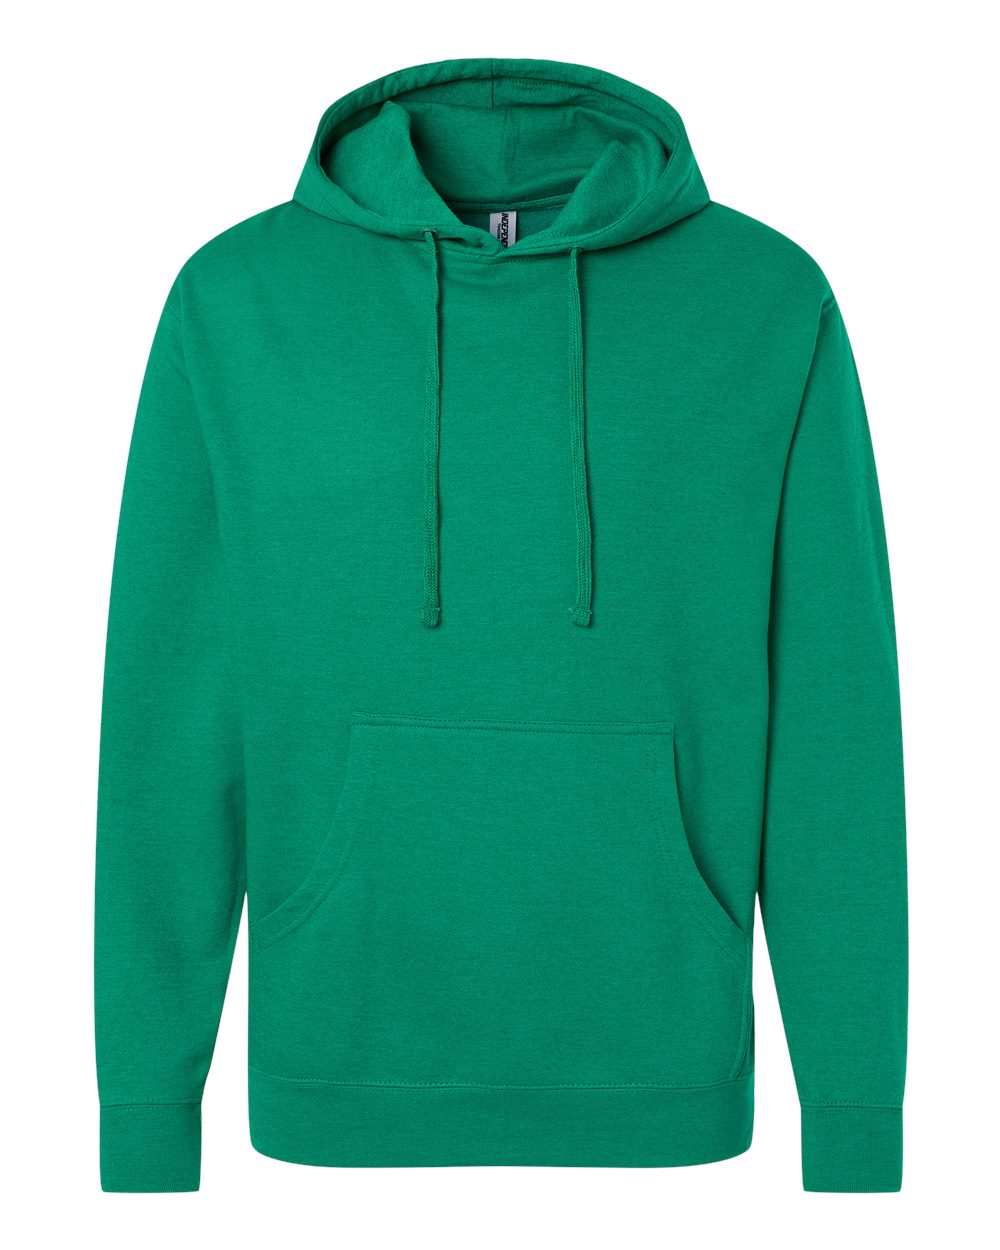 Independent Trading Co. Midweight Hooded Sweatshirt SS4500 #color_Kelly Green Heather